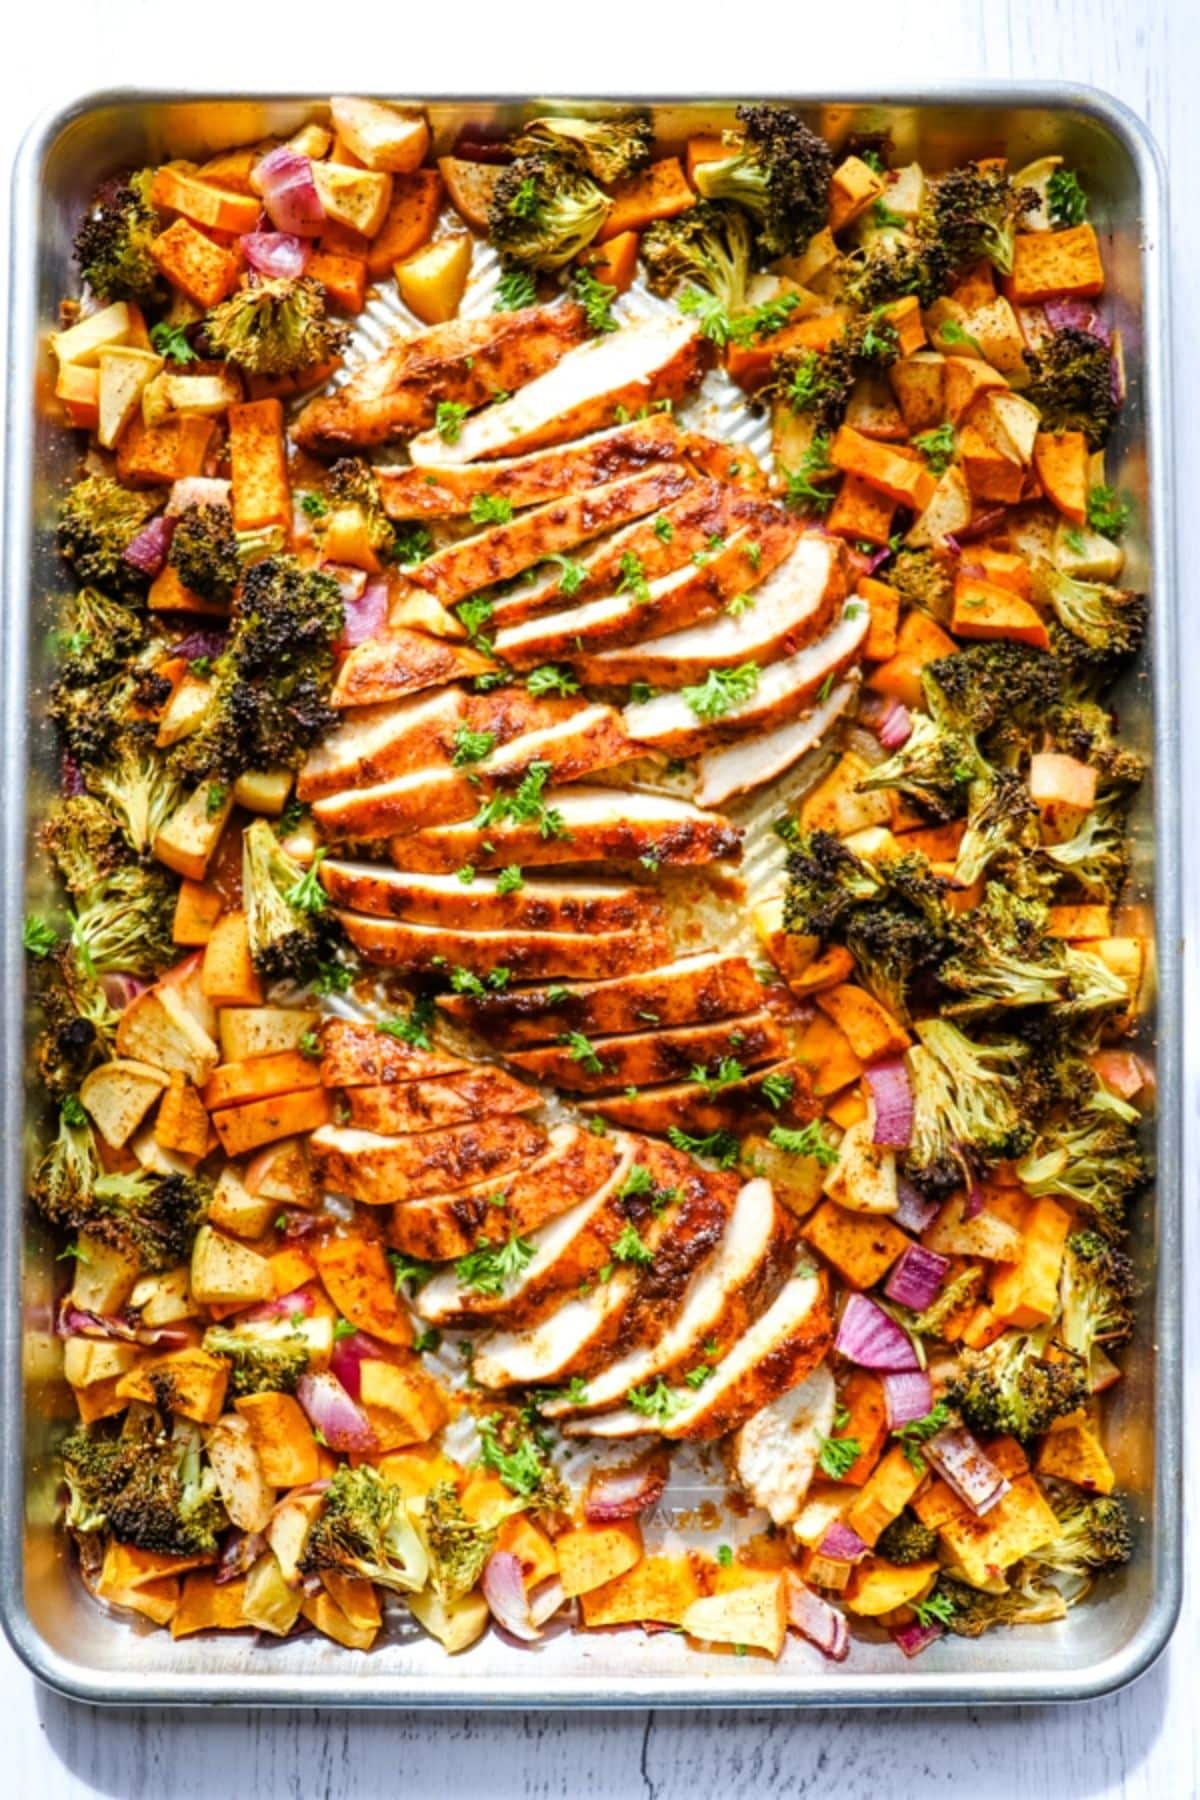 Mouth-watering Sheet Pan Chicken and Sweet Potatoes with Apples and Broccoli.